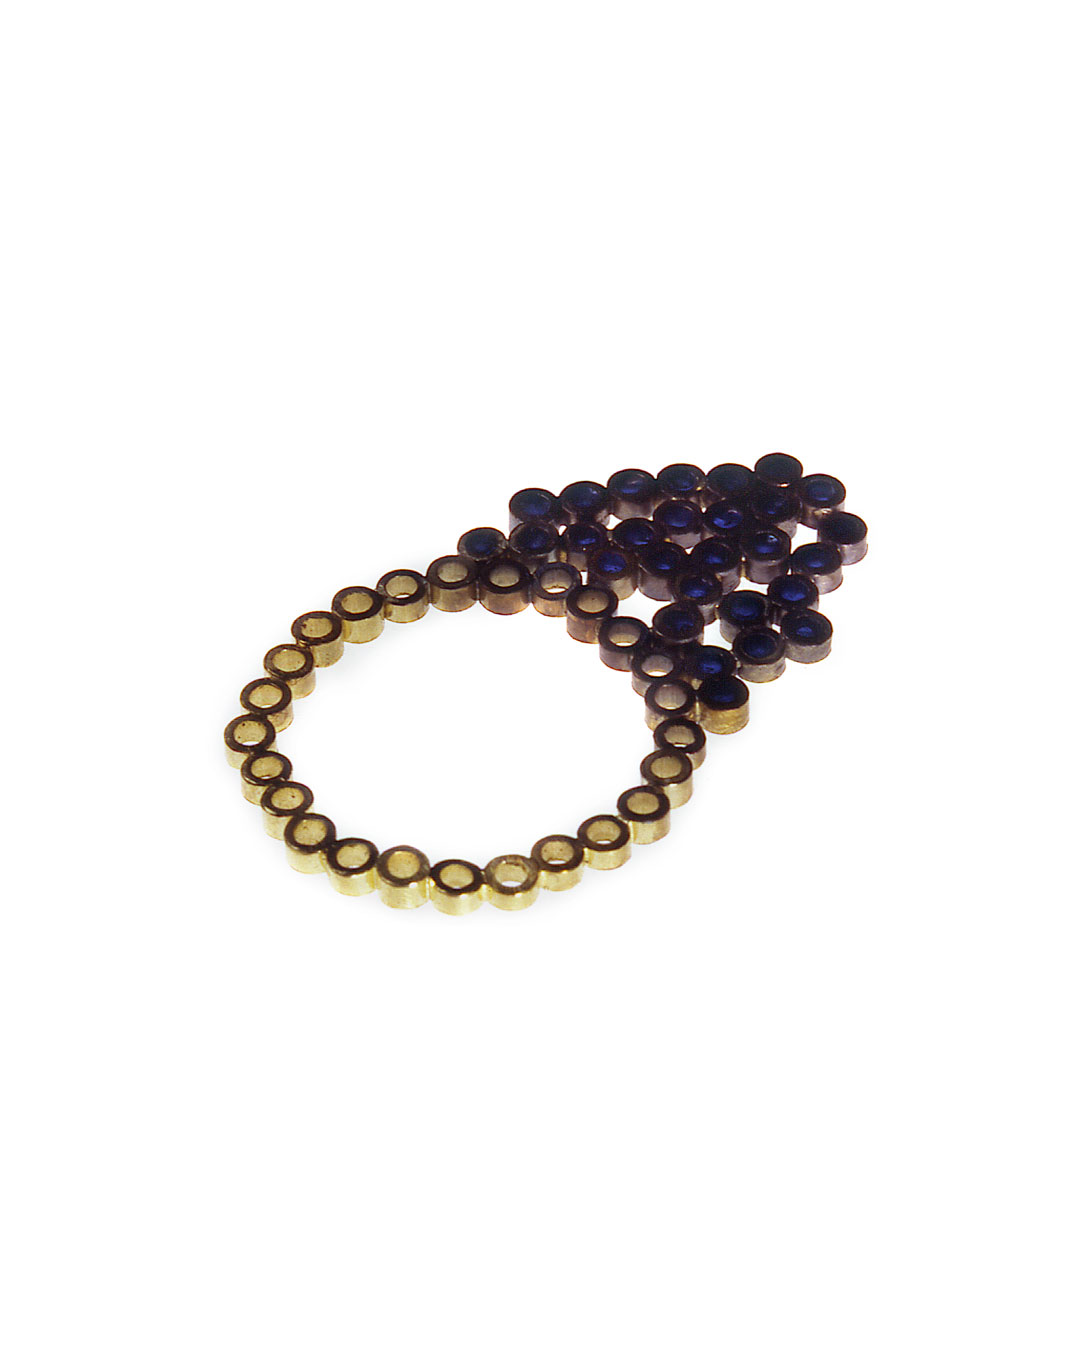 Julie Mollenhauer, untitled, 1999, ring; 18ct gold, glass, 35 x 22 mm, €880